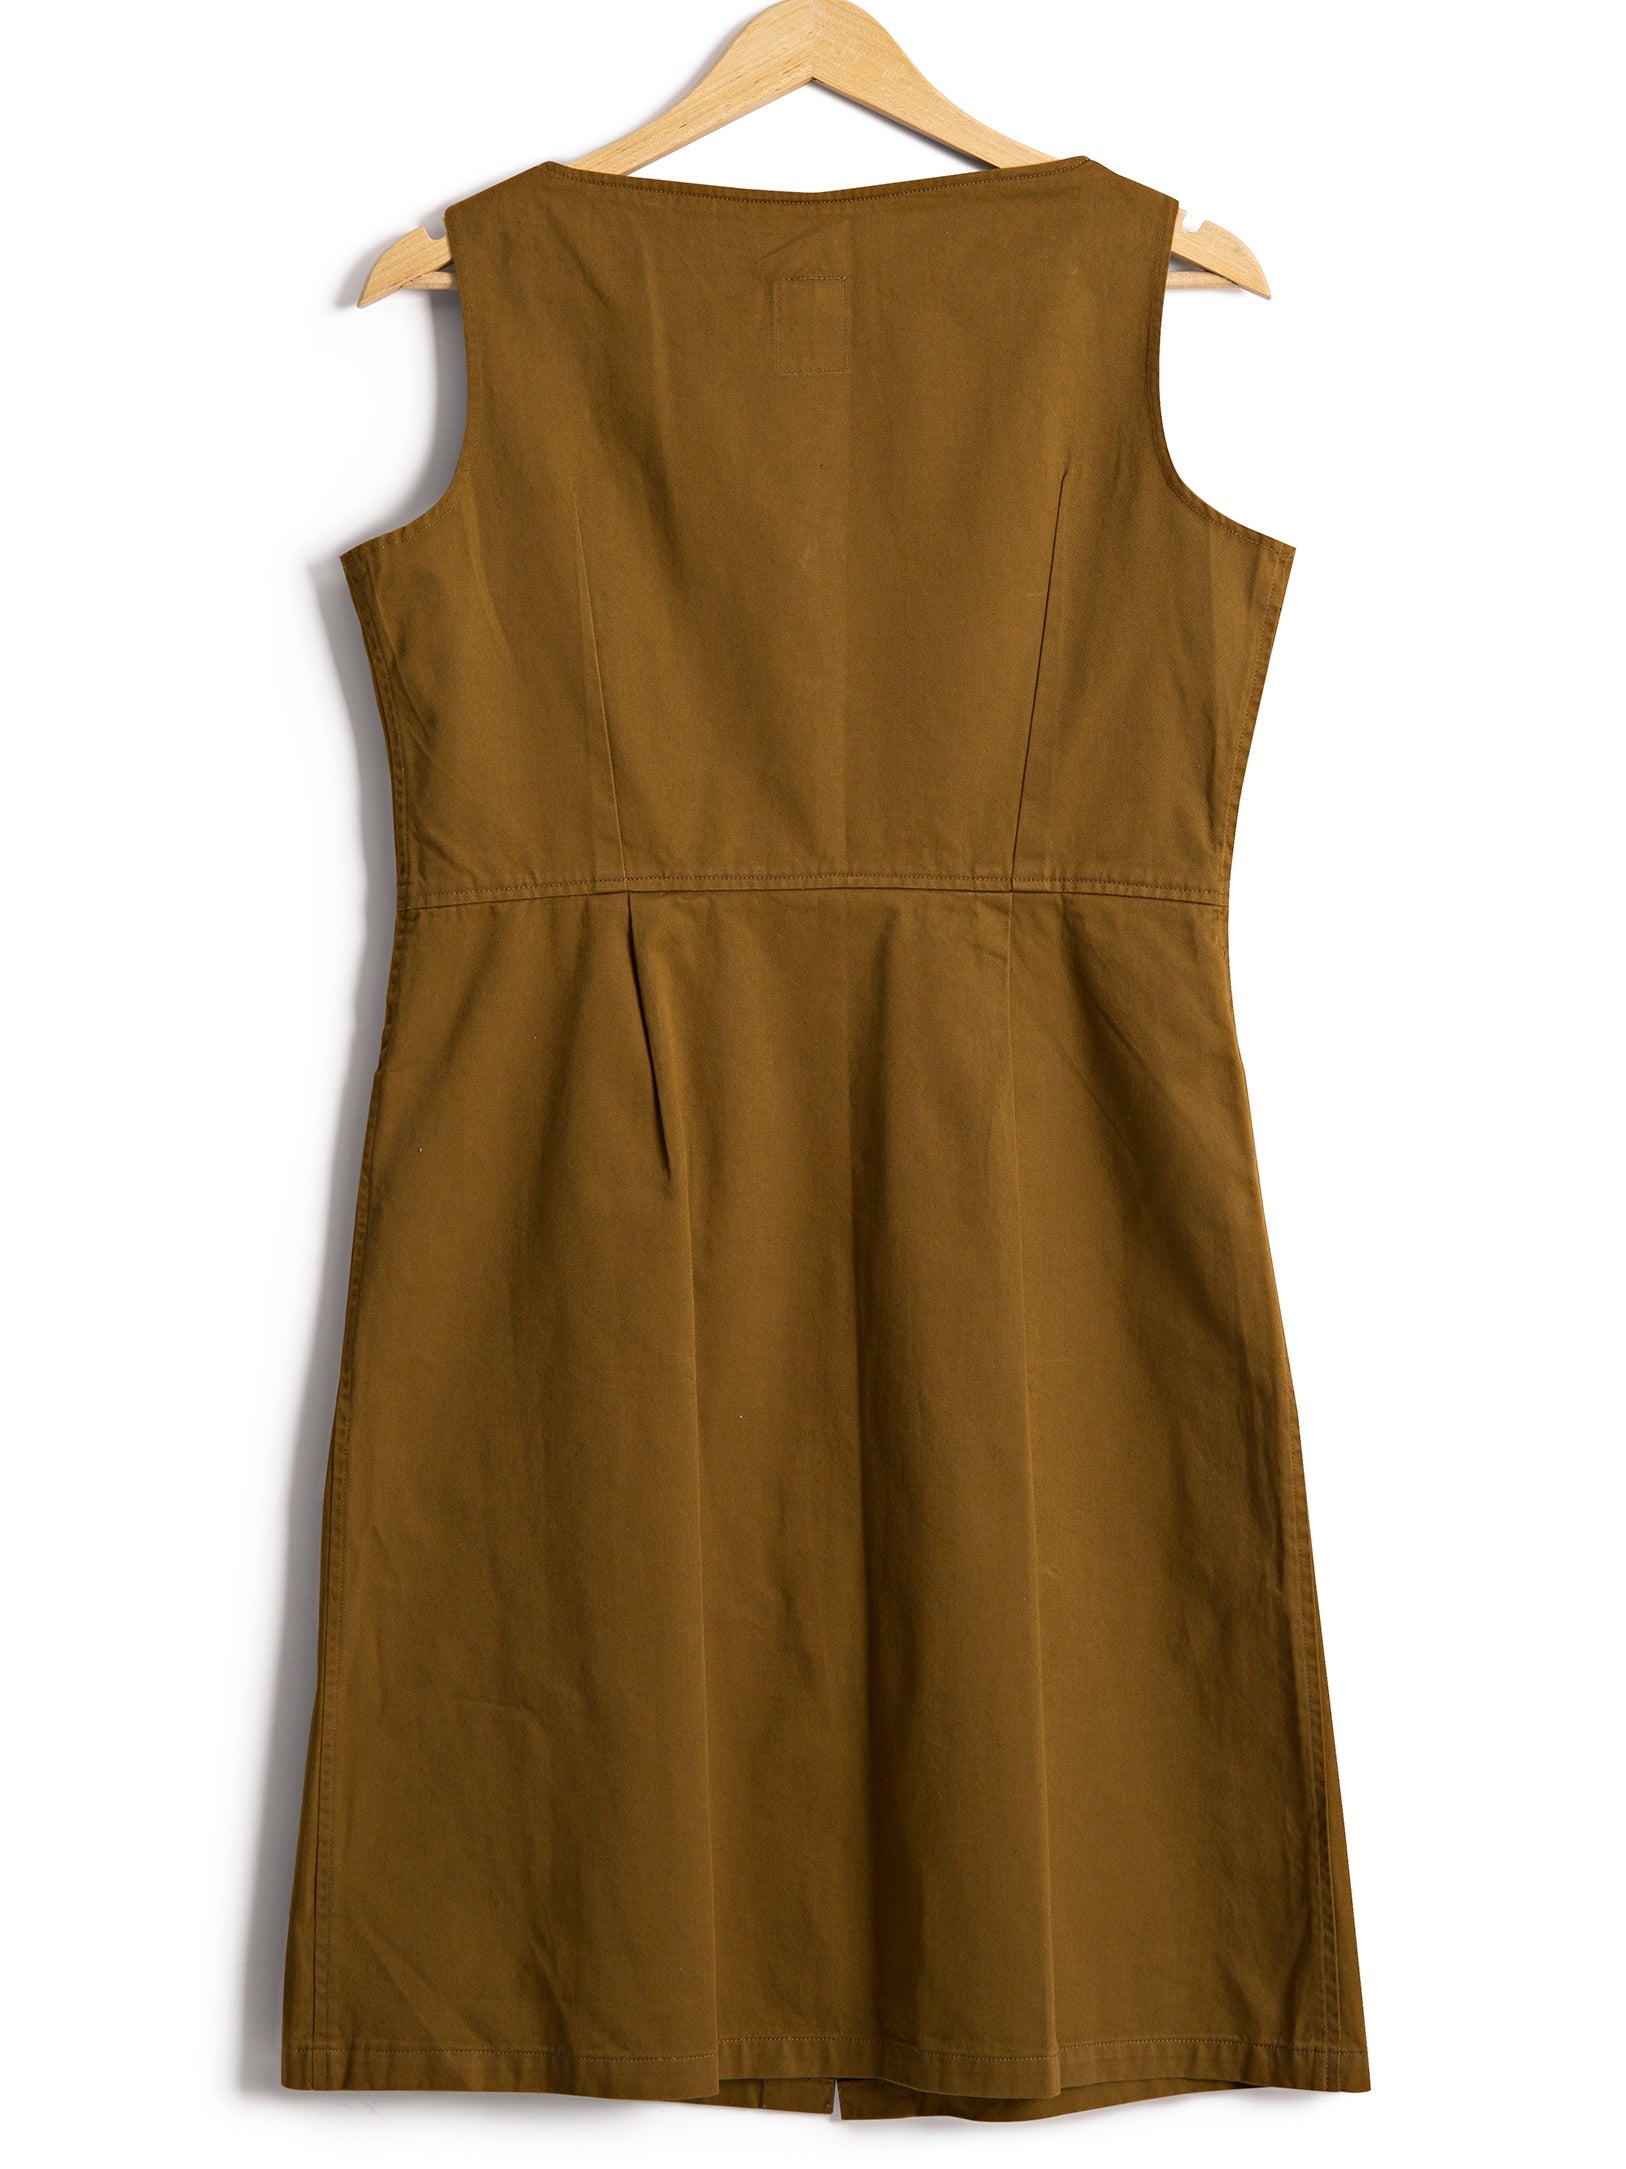 Sundress in Cotton Twill, Dress, Hickman & Bousfield - Hickman & Bousfield, Safari and Travel Clothing